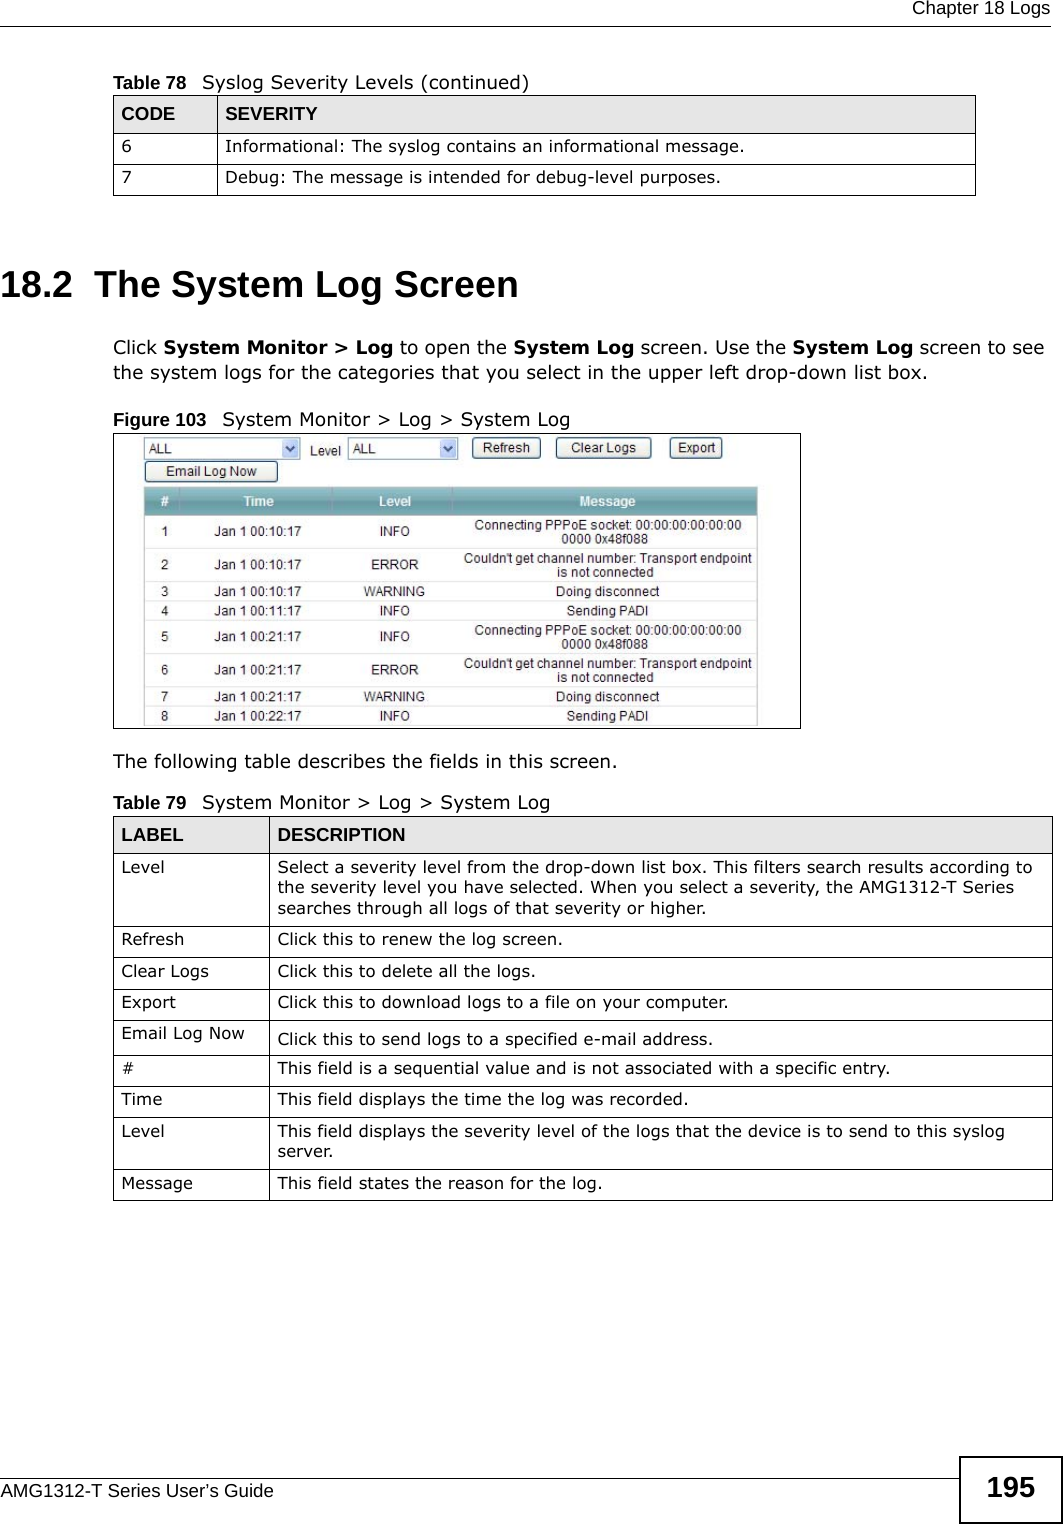  Chapter 18 LogsAMG1312-T Series User’s Guide 19518.2  The System Log Screen Click System Monitor &gt; Log to open the System Log screen. Use the System Log screen to see the system logs for the categories that you select in the upper left drop-down list box. Figure 103   System Monitor &gt; Log &gt; System LogThe following table describes the fields in this screen.6 Informational: The syslog contains an informational message.7 Debug: The message is intended for debug-level purposes.Table 78   Syslog Severity Levels (continued)CODE SEVERITYTable 79   System Monitor &gt; Log &gt; System LogLABEL DESCRIPTIONLevel  Select a severity level from the drop-down list box. This filters search results according to the severity level you have selected. When you select a severity, the AMG1312-T Series searches through all logs of that severity or higher. Refresh Click this to renew the log screen. Clear Logs Click this to delete all the logs. Export Click this to download logs to a file on your computer.Email Log Now Click this to send logs to a specified e-mail address.#This field is a sequential value and is not associated with a specific entry.Time  This field displays the time the log was recorded. Level This field displays the severity level of the logs that the device is to send to this syslog server.Message This field states the reason for the log.